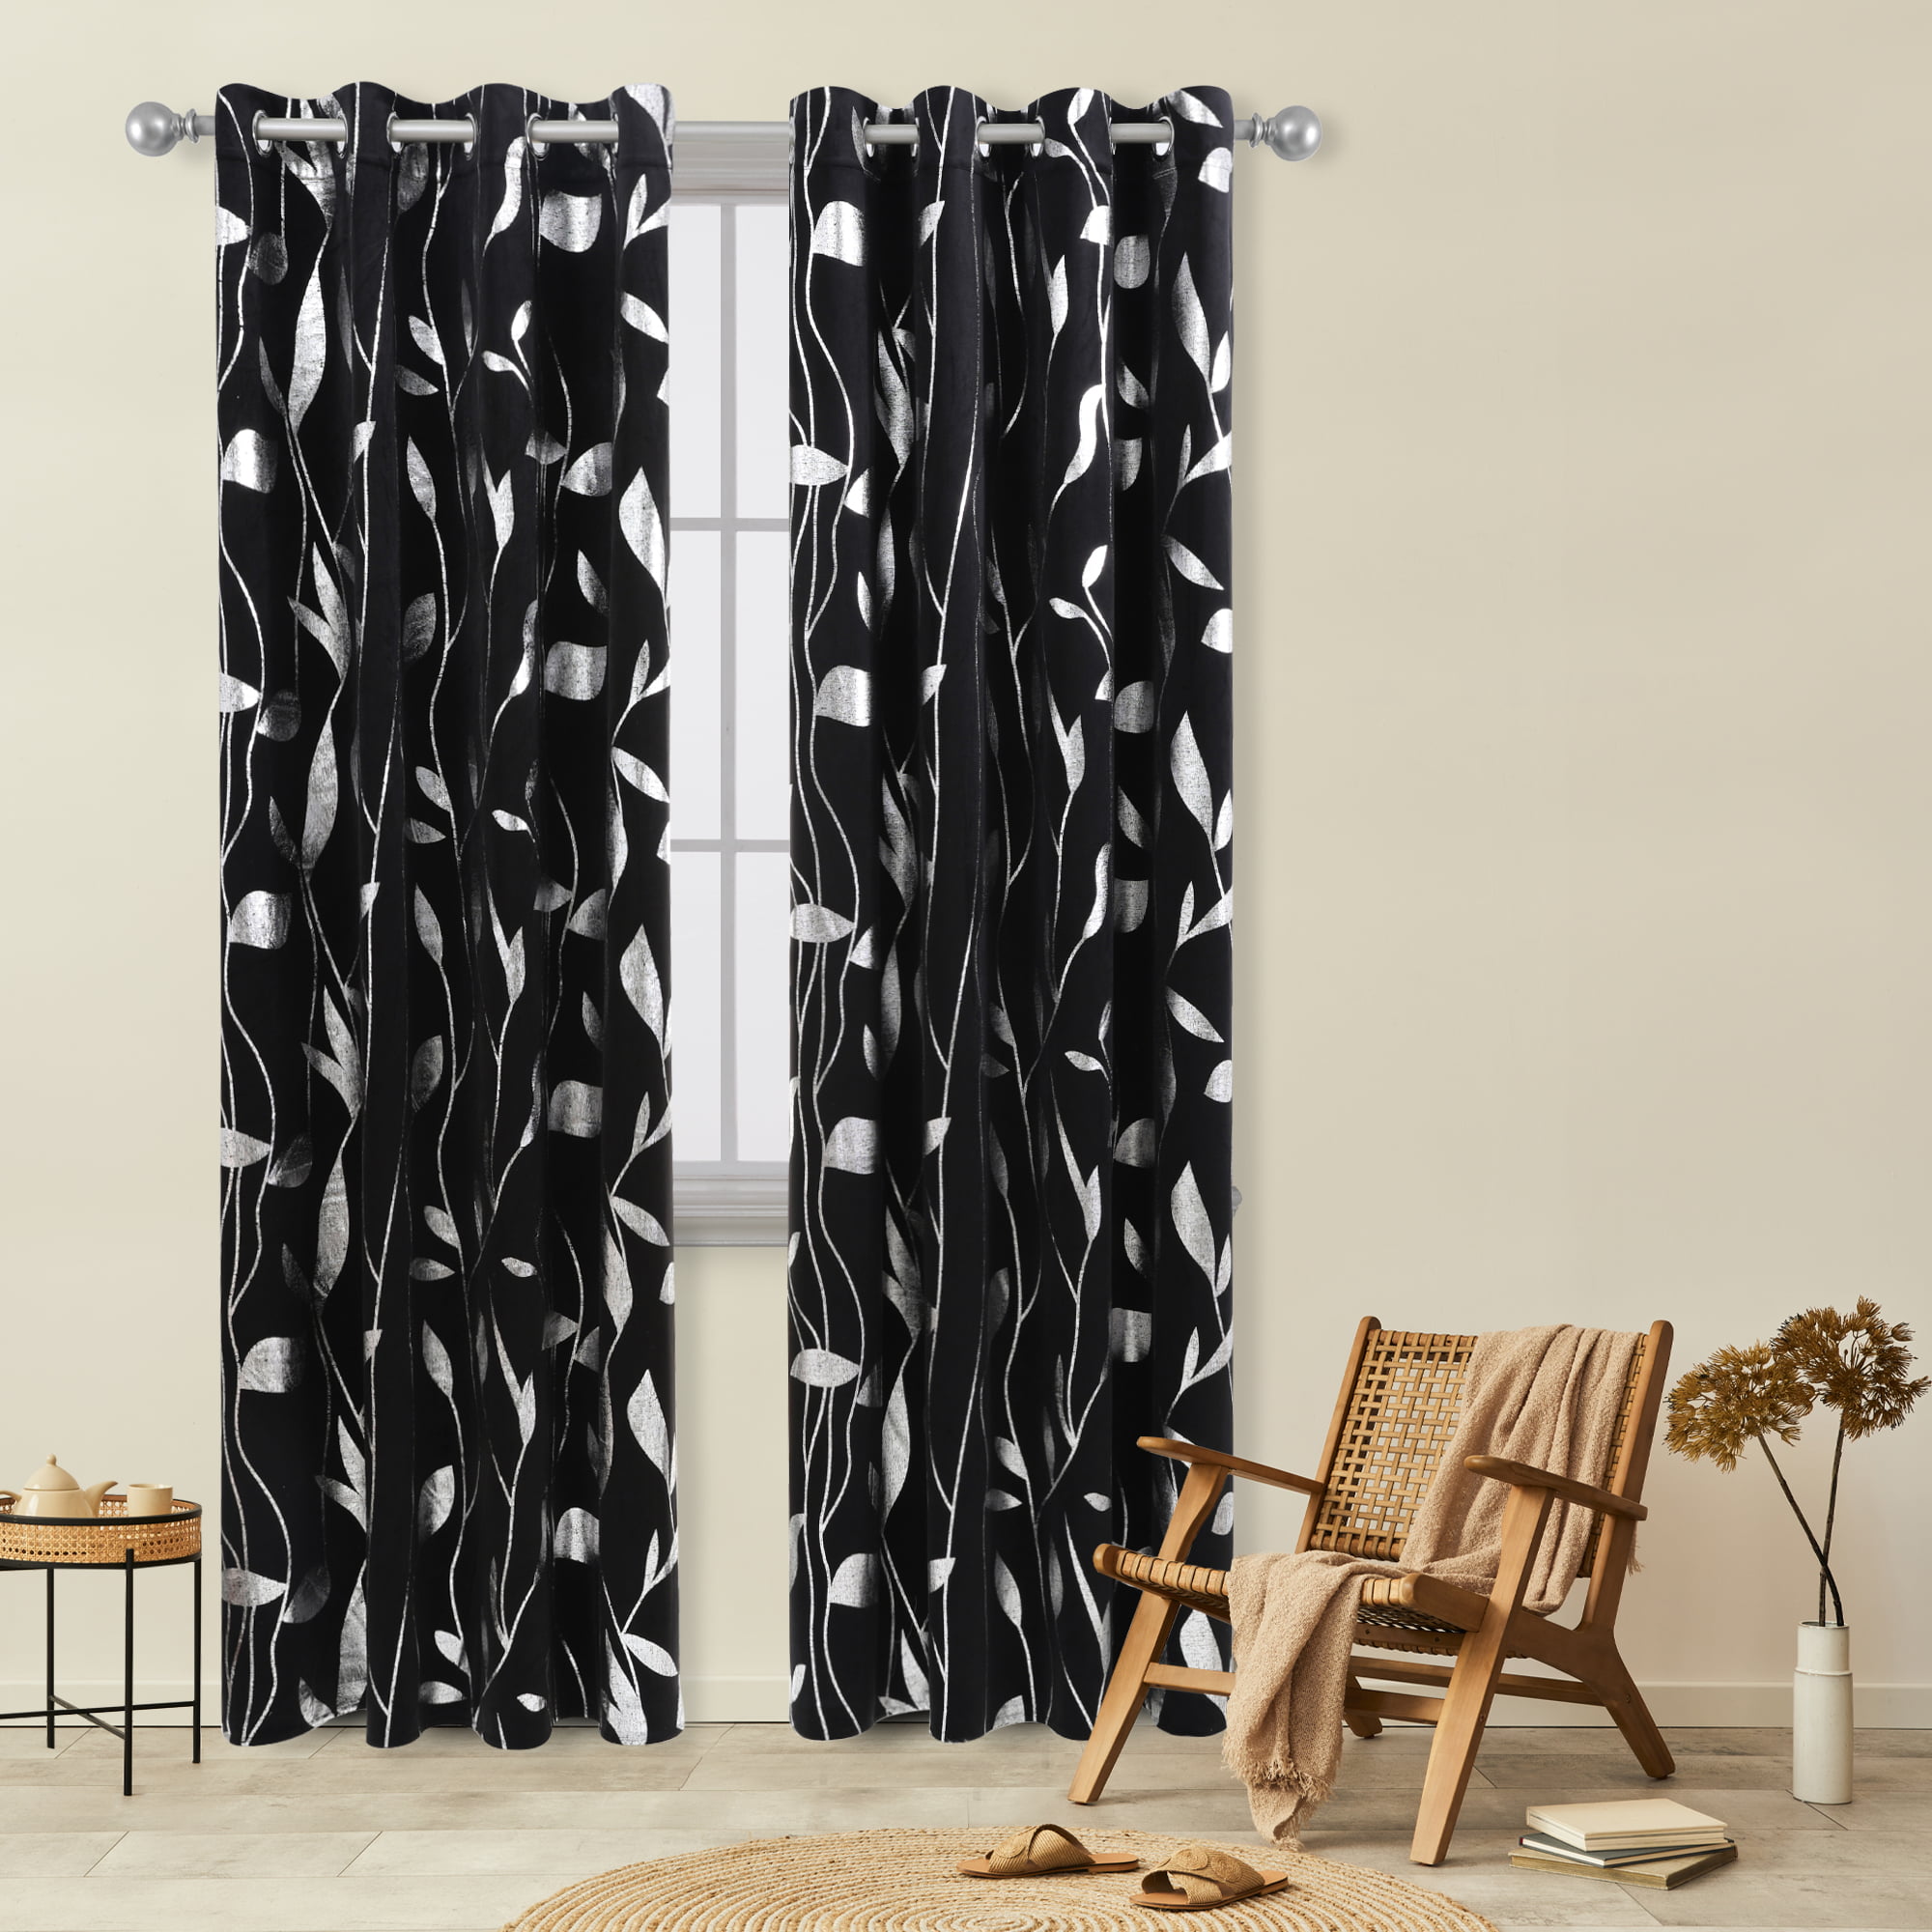 2 Panels Blackout Curtains Velvet Thermal Insulated Window Treatment 52 x 84 